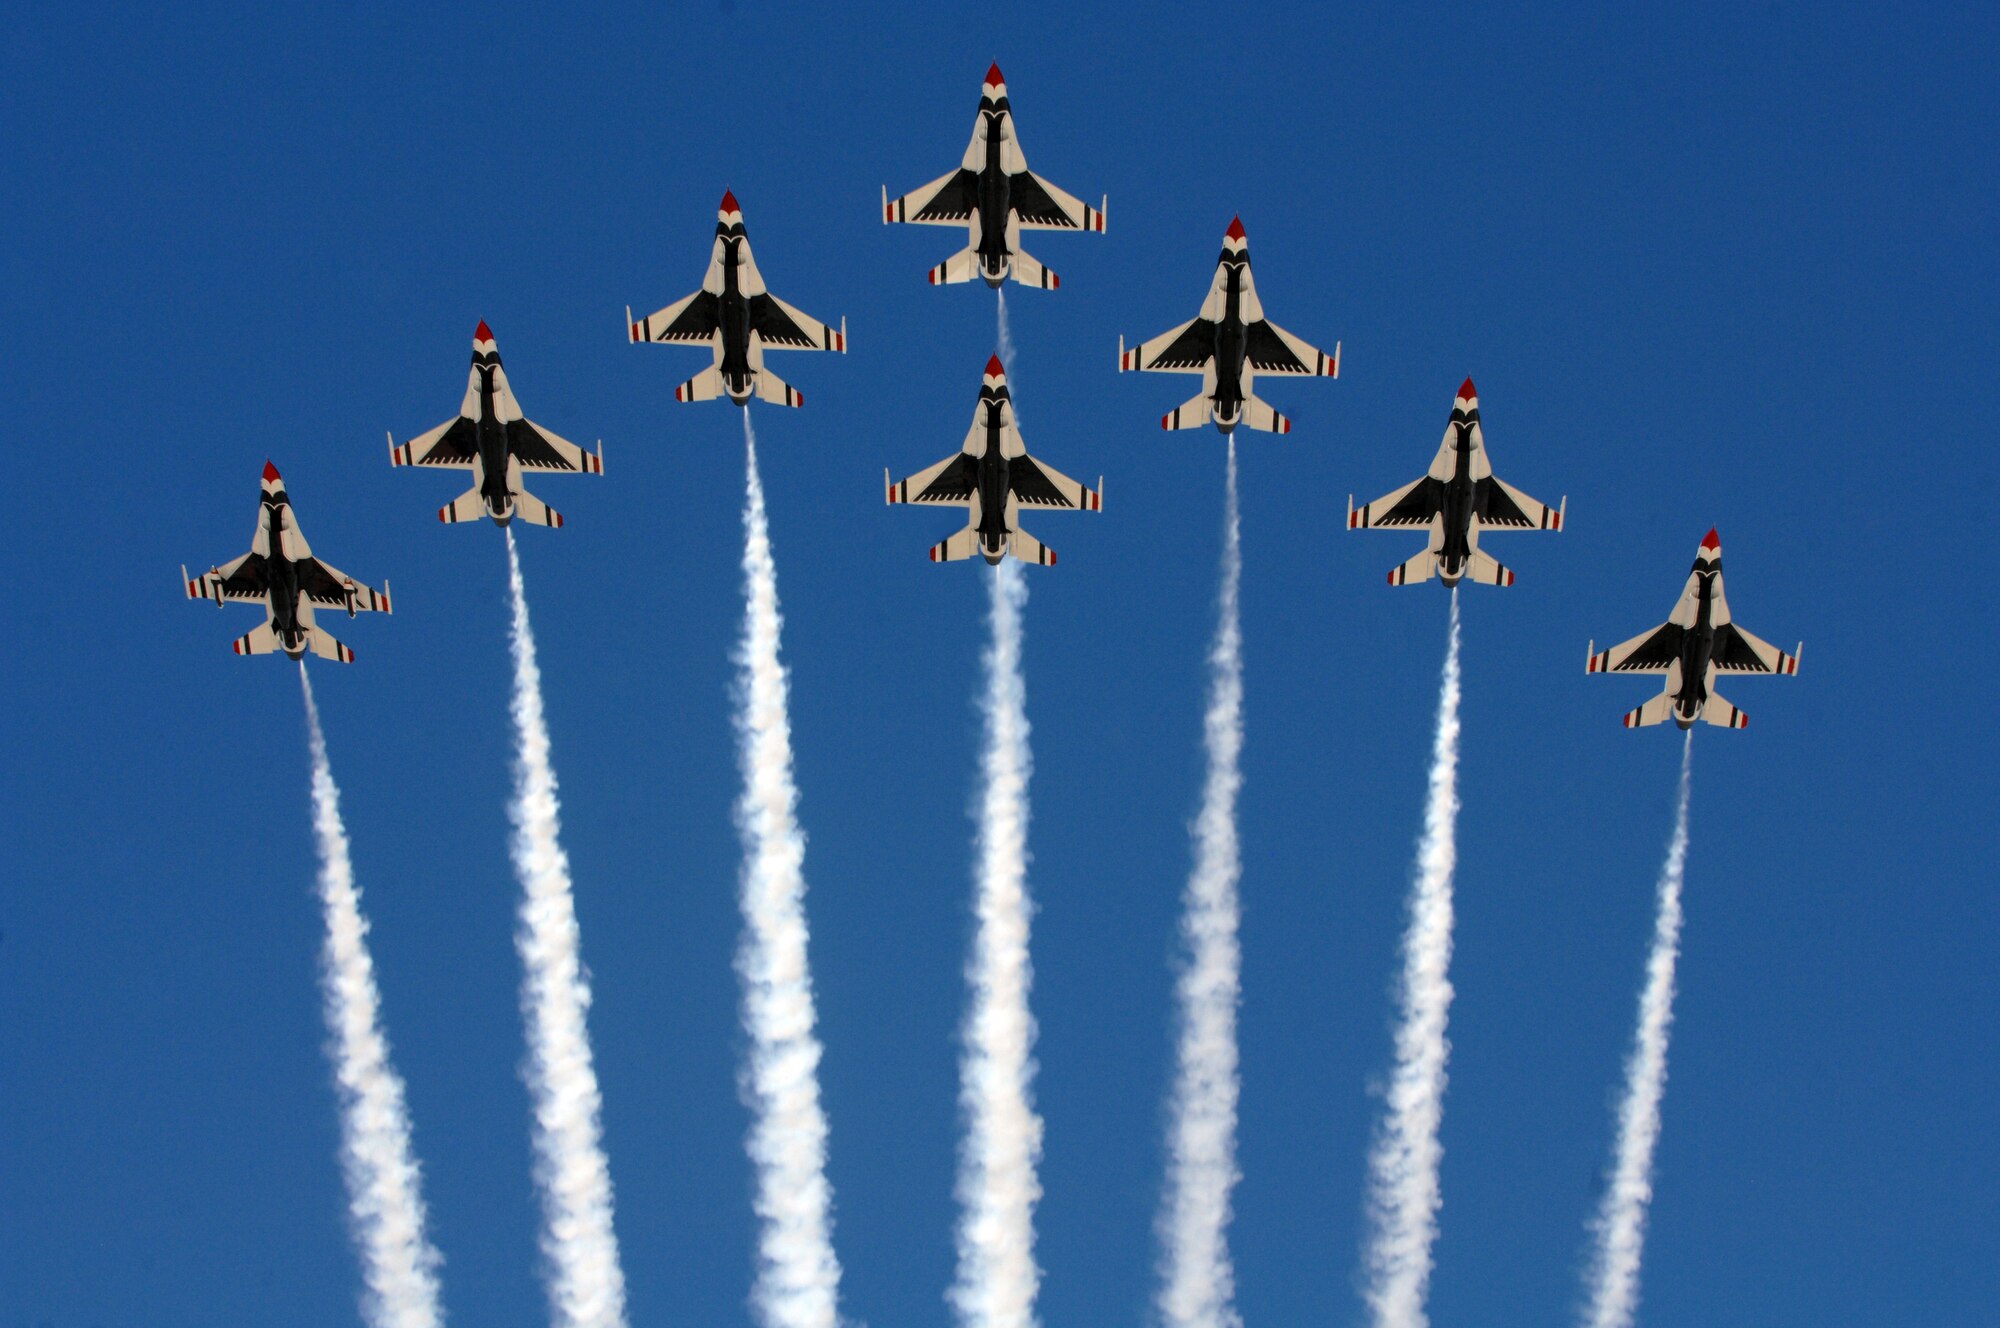 The United States Air Force Thunderbirds F-16 Falcon demonstration team performs  at a recent air show. The Thunderbirds will headline the Fort Smith Air Show scheduled for Oct. 1-2 at the 188th Fighter Wing in Fort Smith, Ark. (U.S. Air Force photo by Thunderbirds Public Affairs)